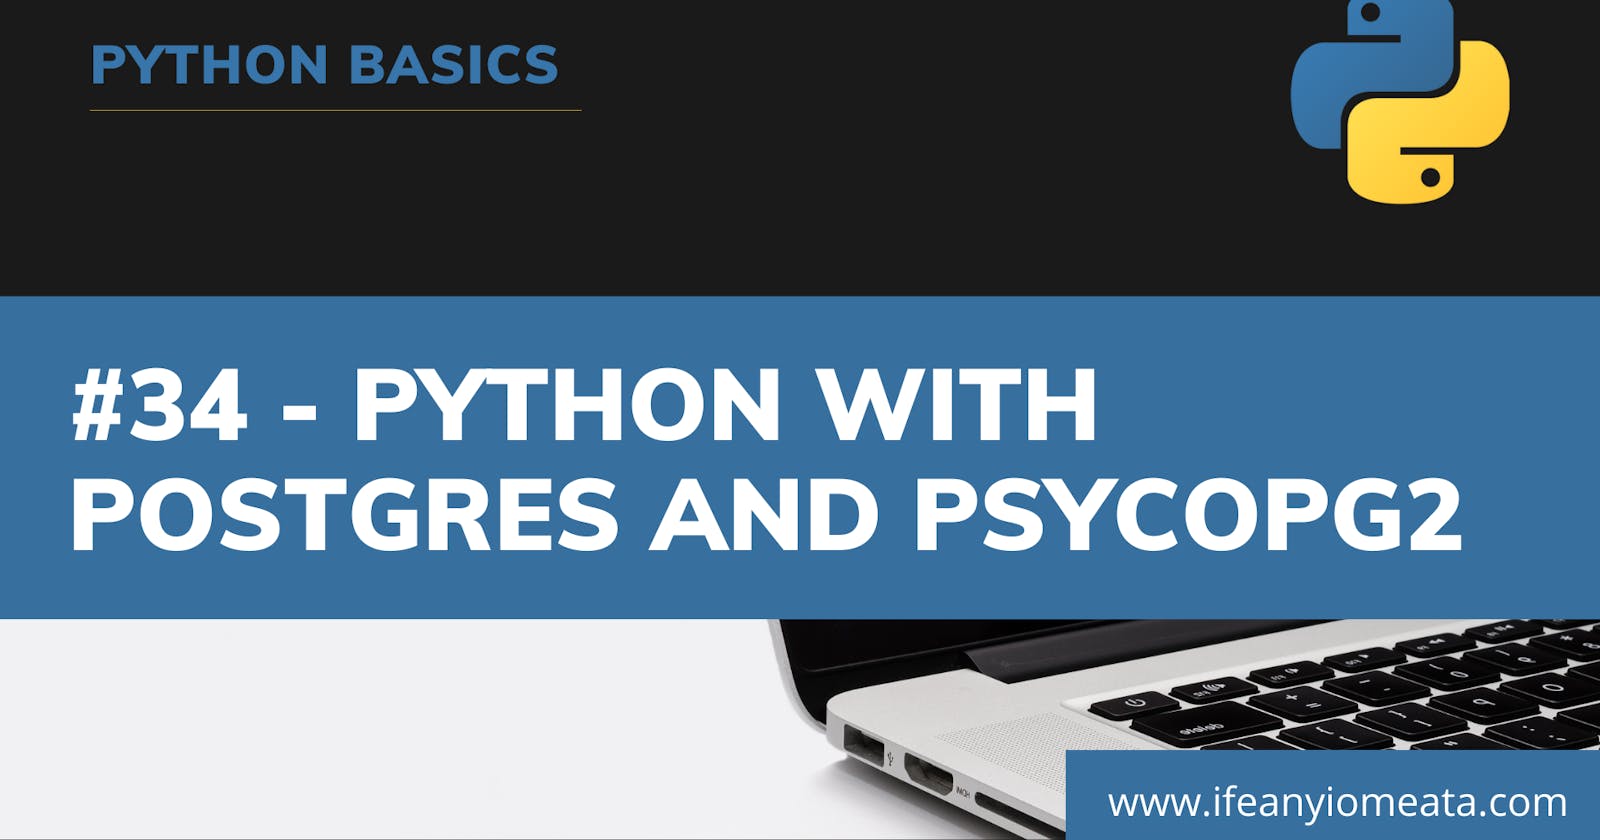 #34 - Python with Postgres and psycopg2